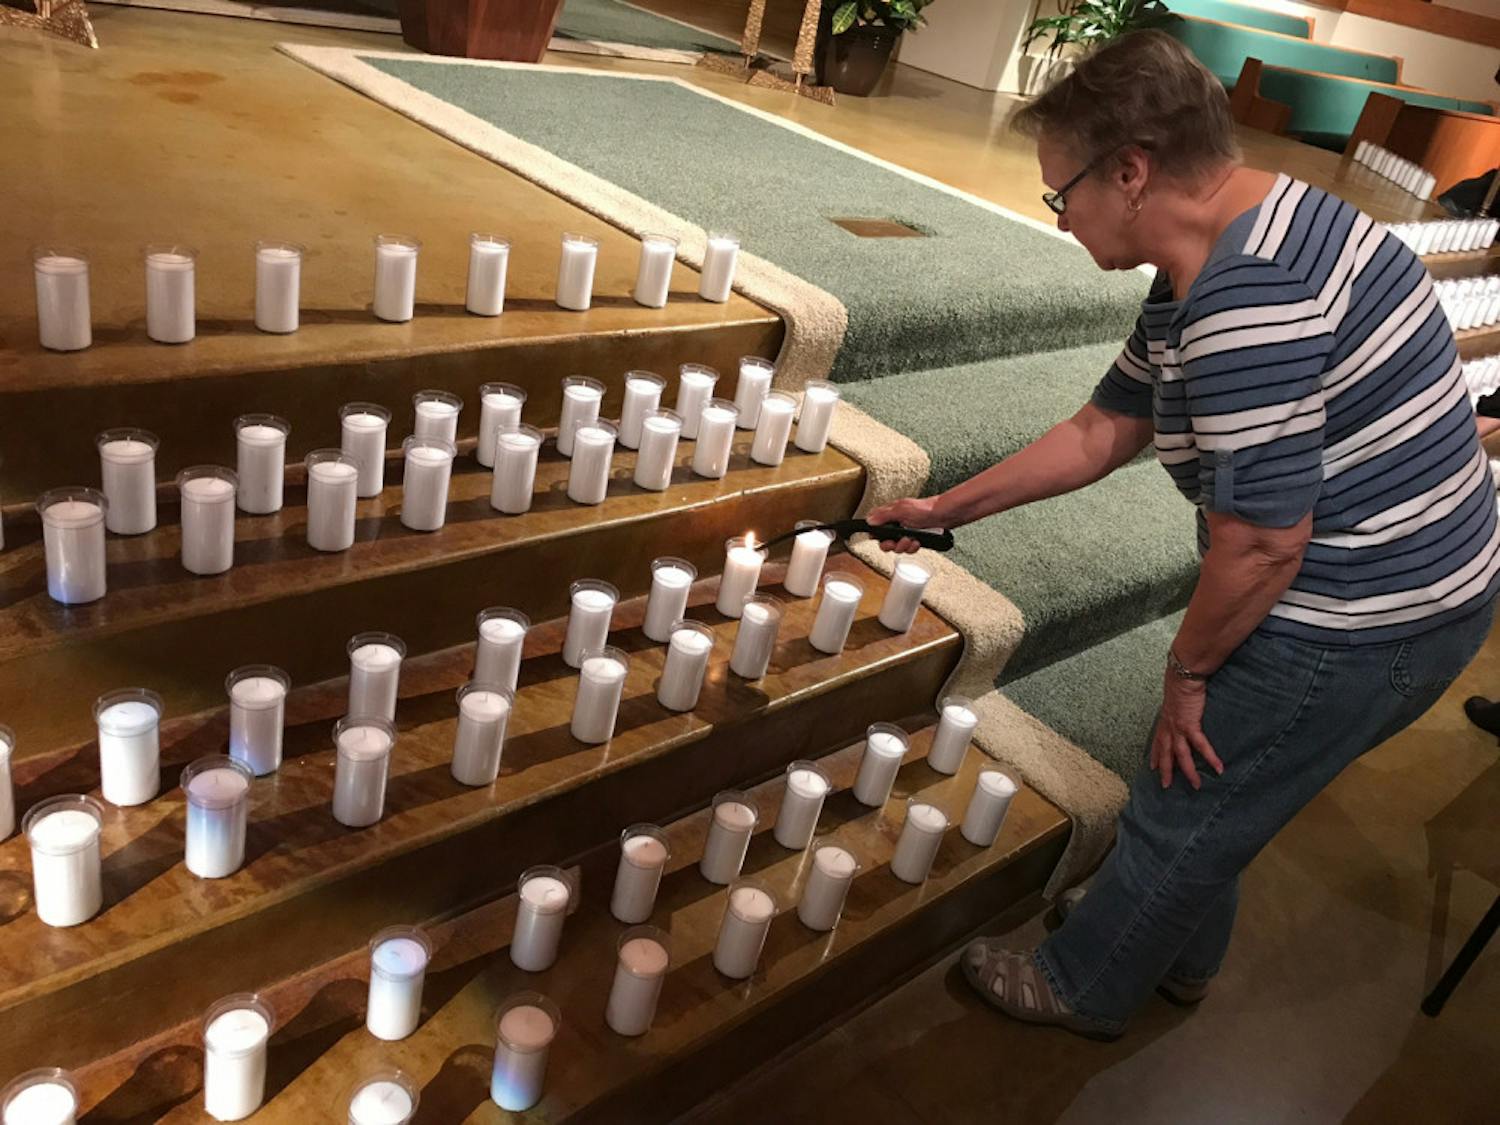 Susan Johnson bends to light one of the 352 candles in St. Patrick Catholic Church, located at 500 NE 16th Ave., on Thursday night. The candles, which represented the 352 inmates on death row in Florida, were part of the church’s Cities for Life Day event.